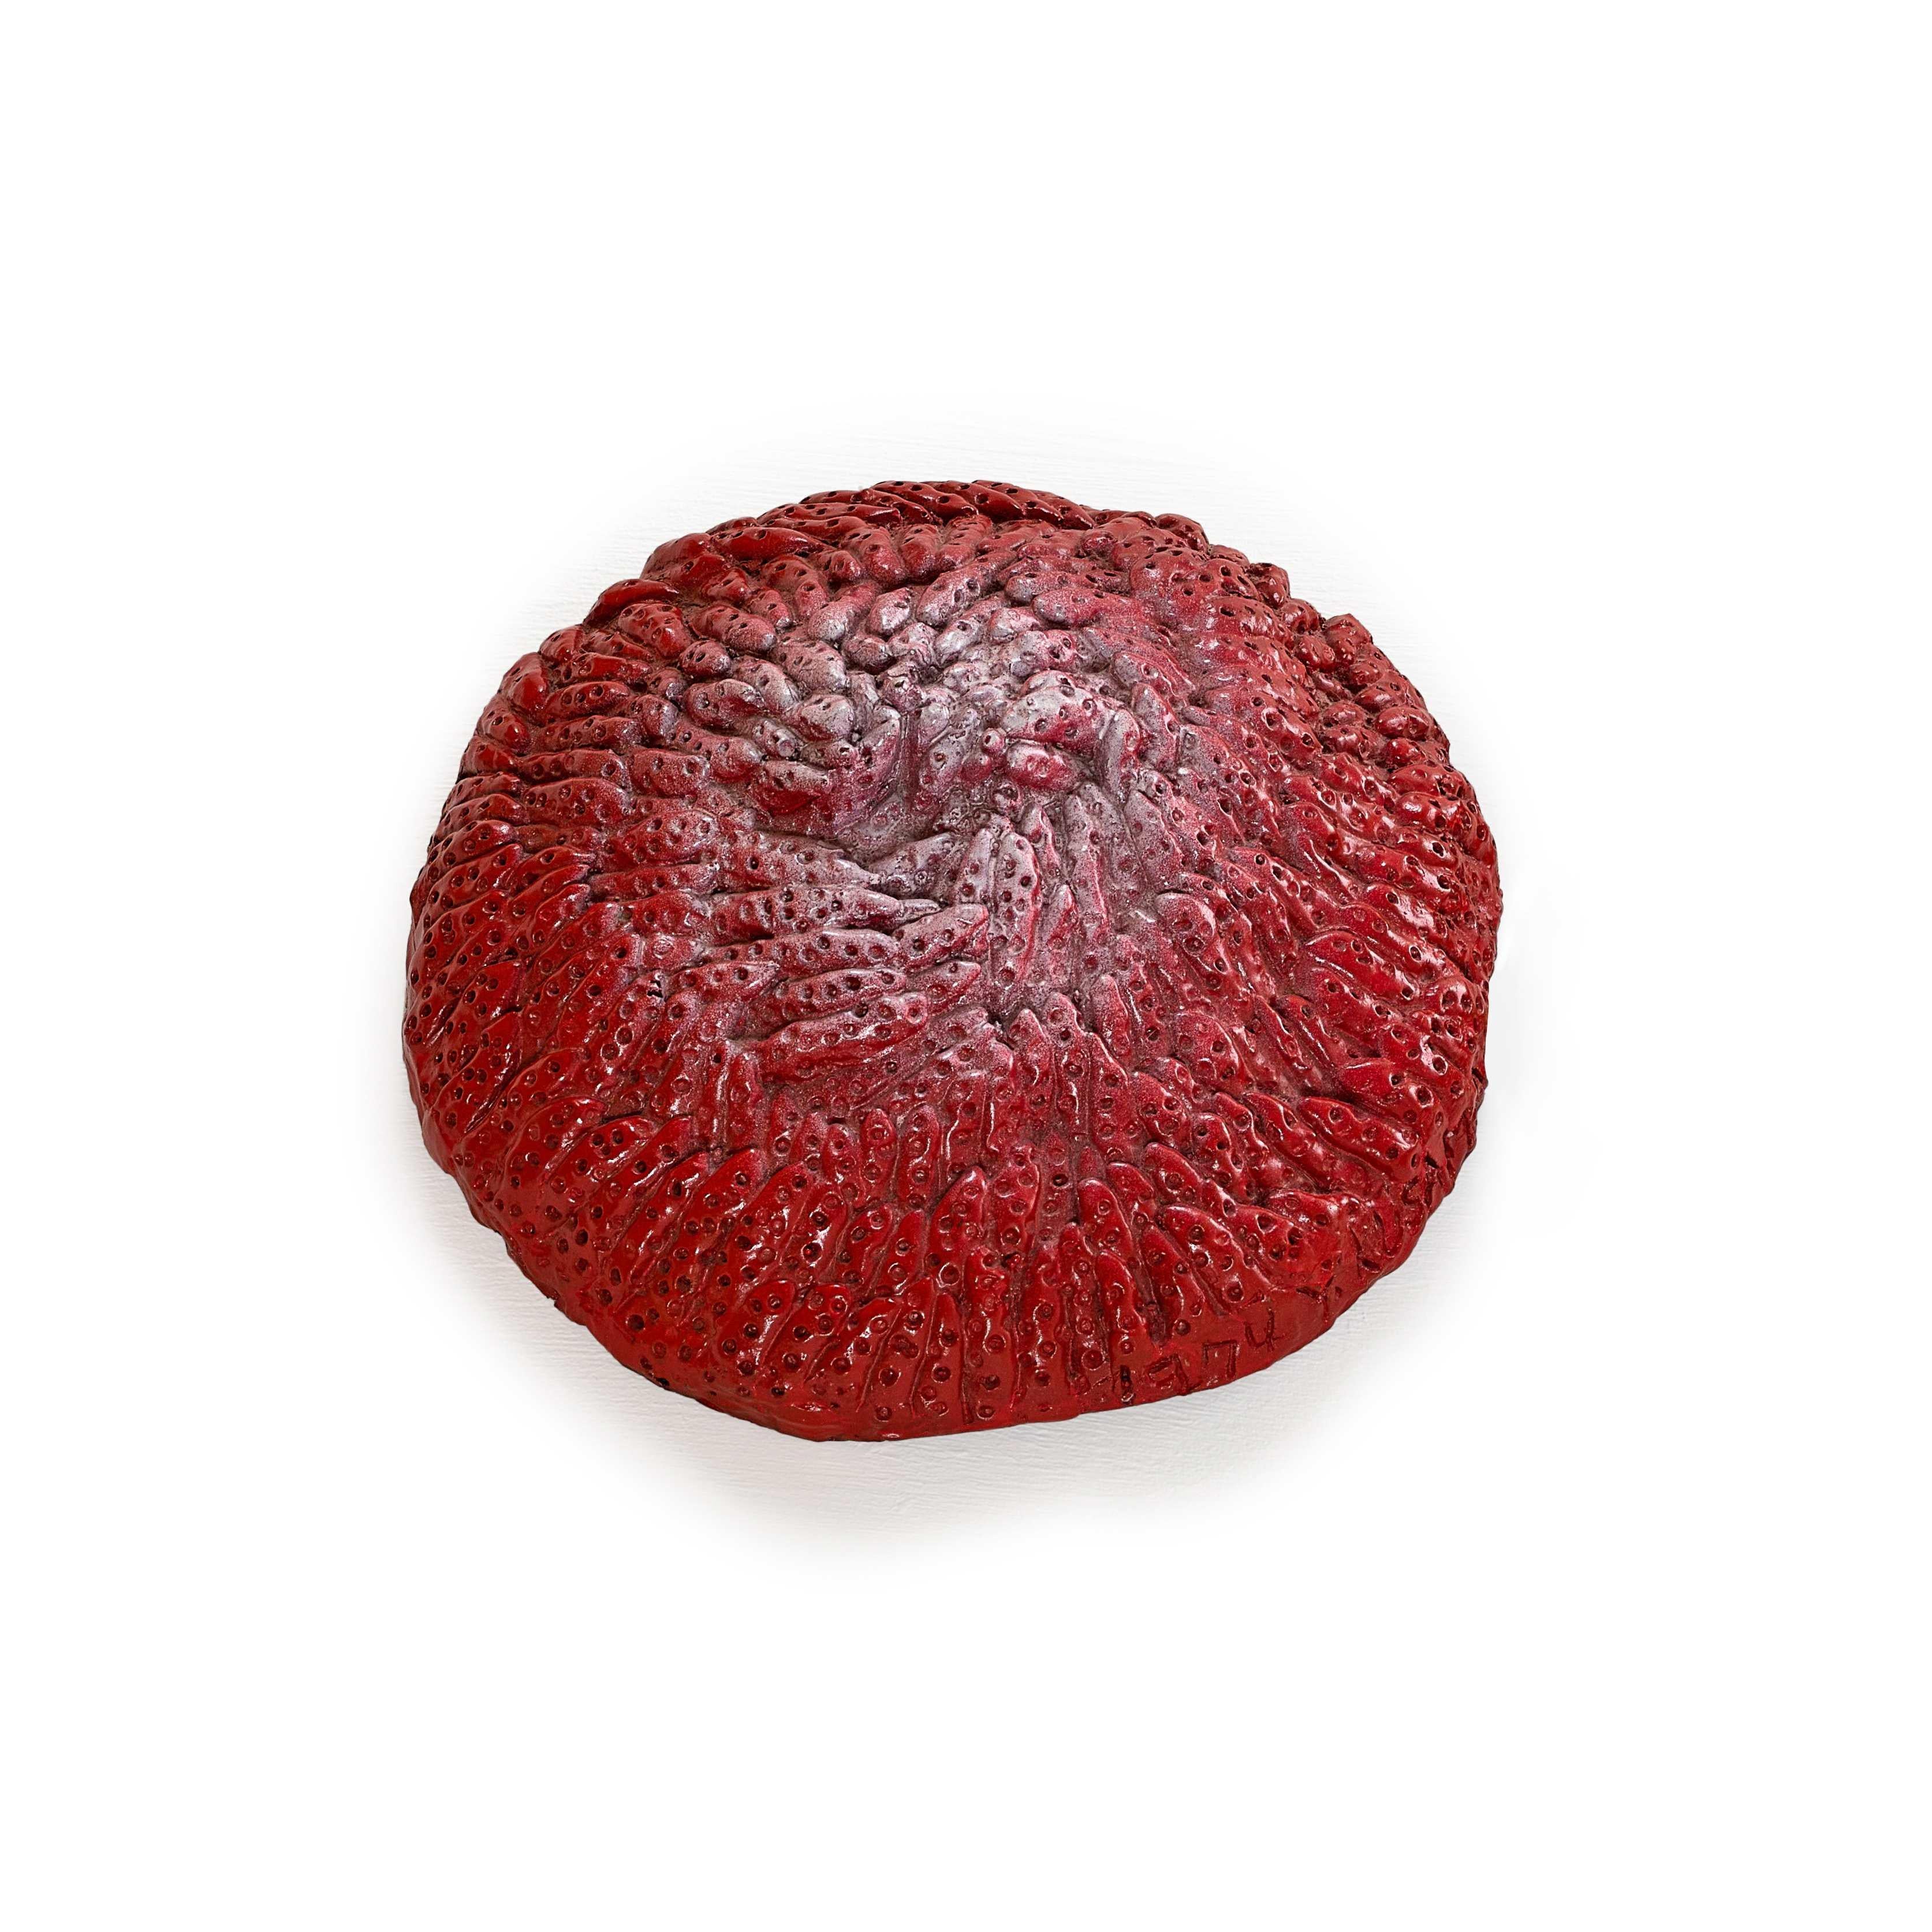 Strawberry 1. Bronze Sculpture by Yayoi Kusama (1974/93) Limited Edition of 30 For Sale 3